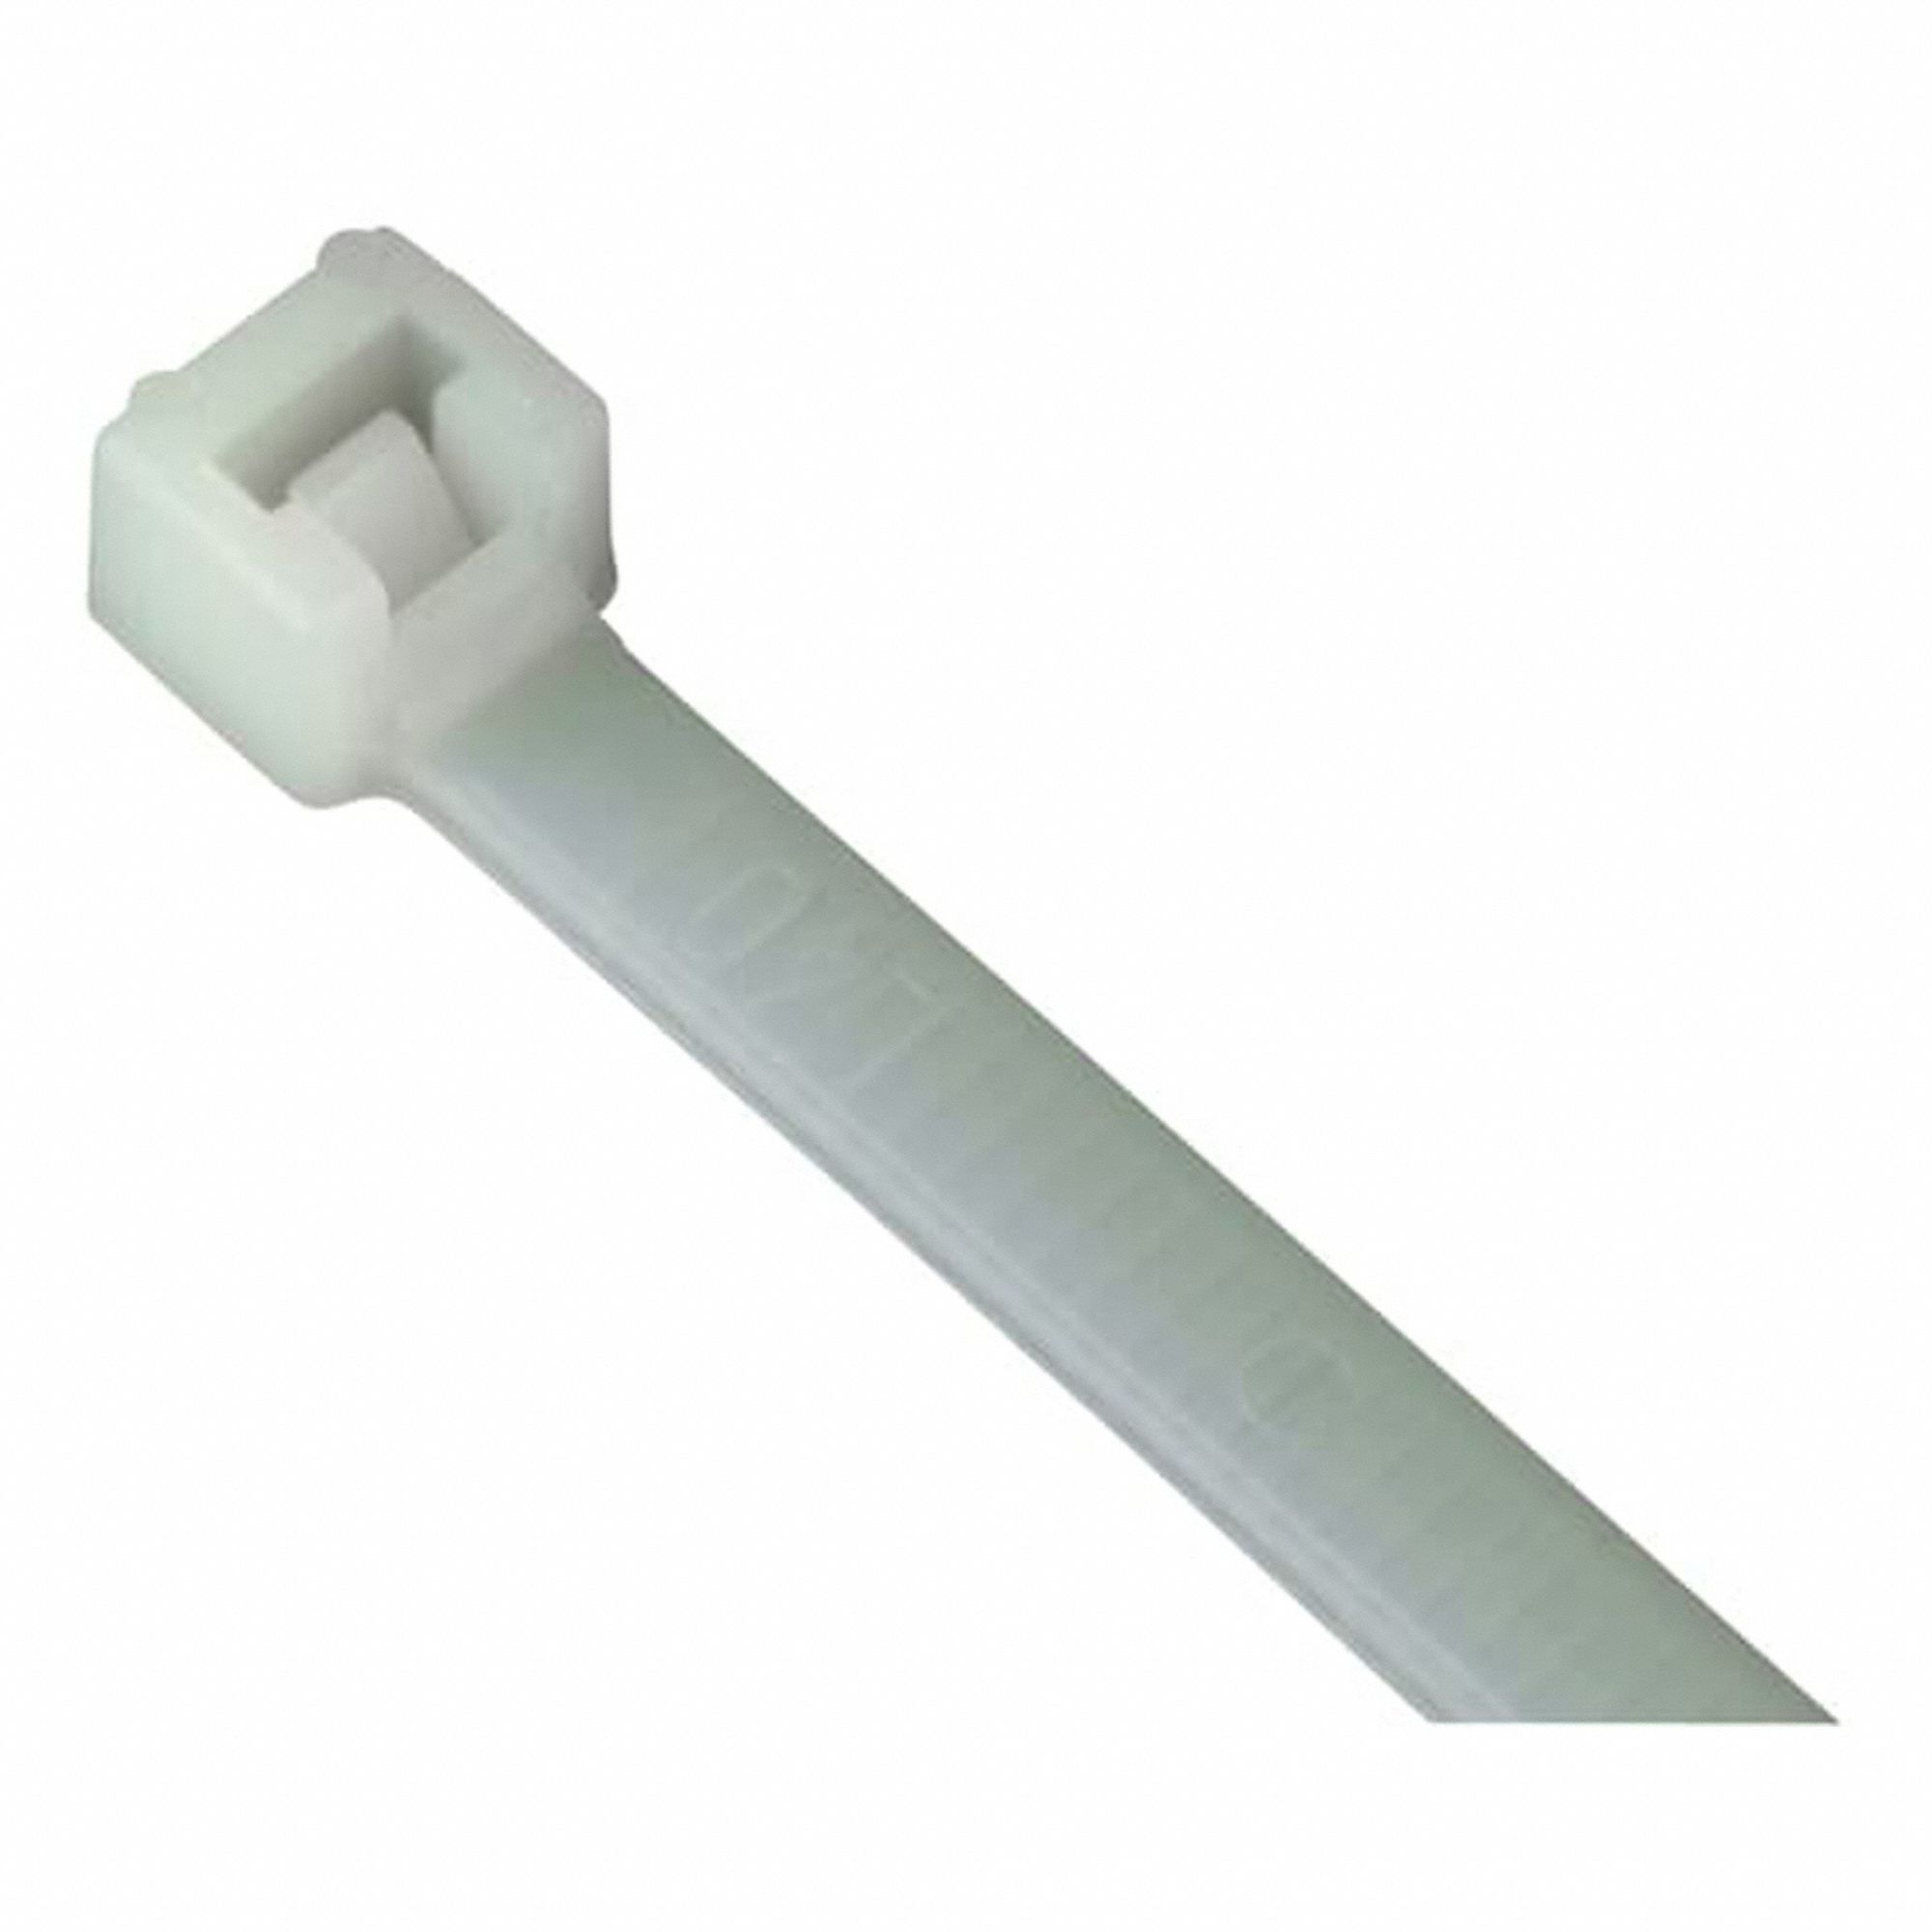 CABLE TIE, NYLON 6/6, NATURAL, 0.14 IN W, 8.9 IN, UV/WEATHER RESISTANT, PLASTIC PAWL, 100 PK